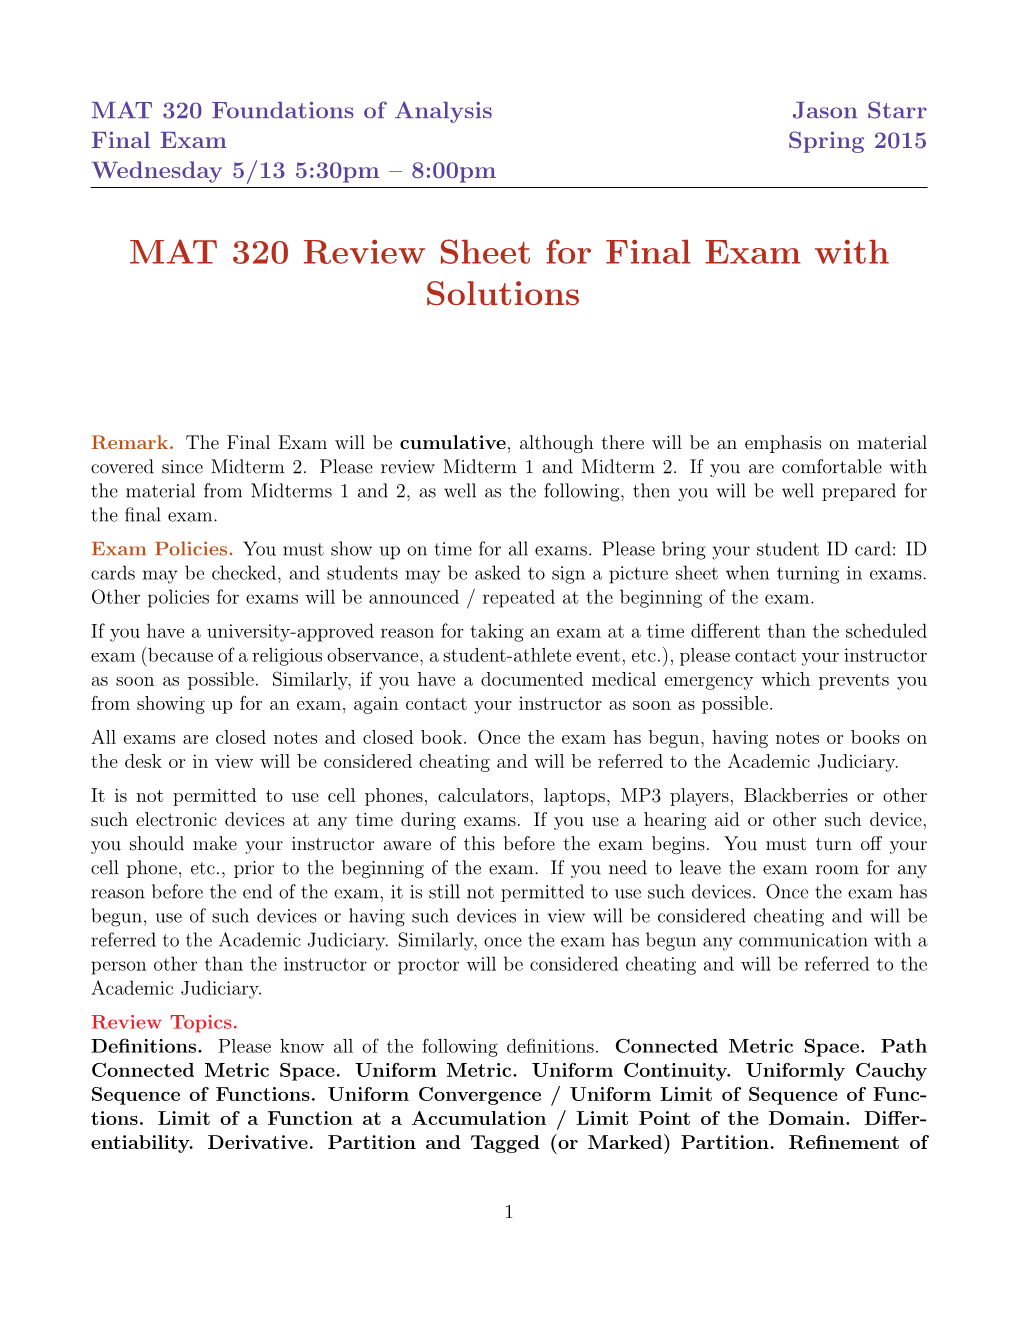 MAT 320 Review Sheet for Final Exam with Solutions